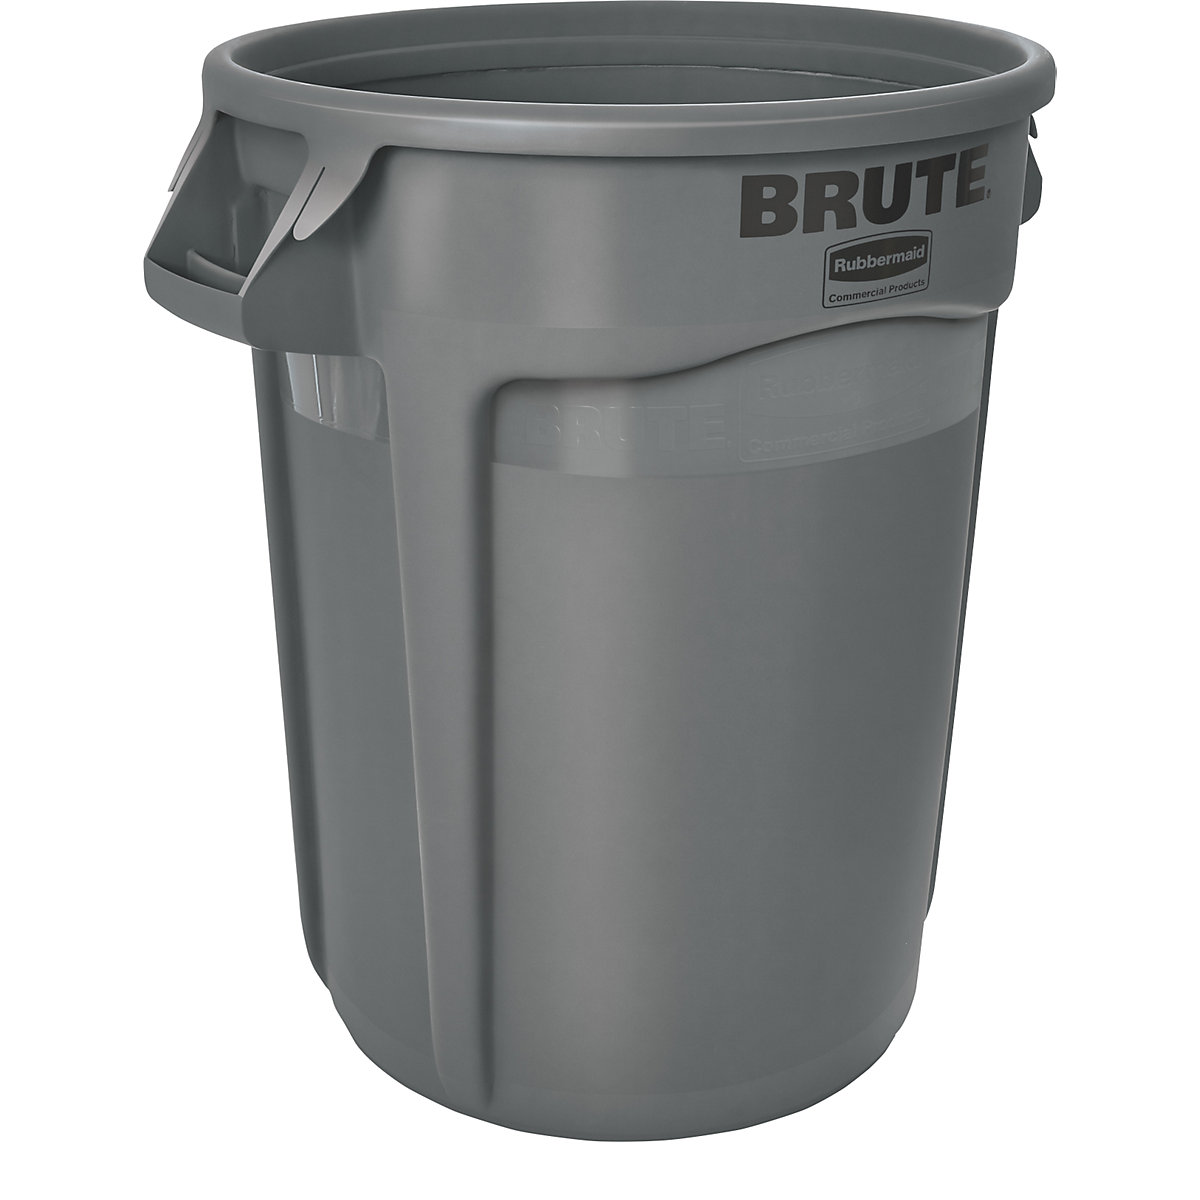 Rubbermaid – BRUTE® universal container/multi purpose container, round, capacity approx. 121 l, grey